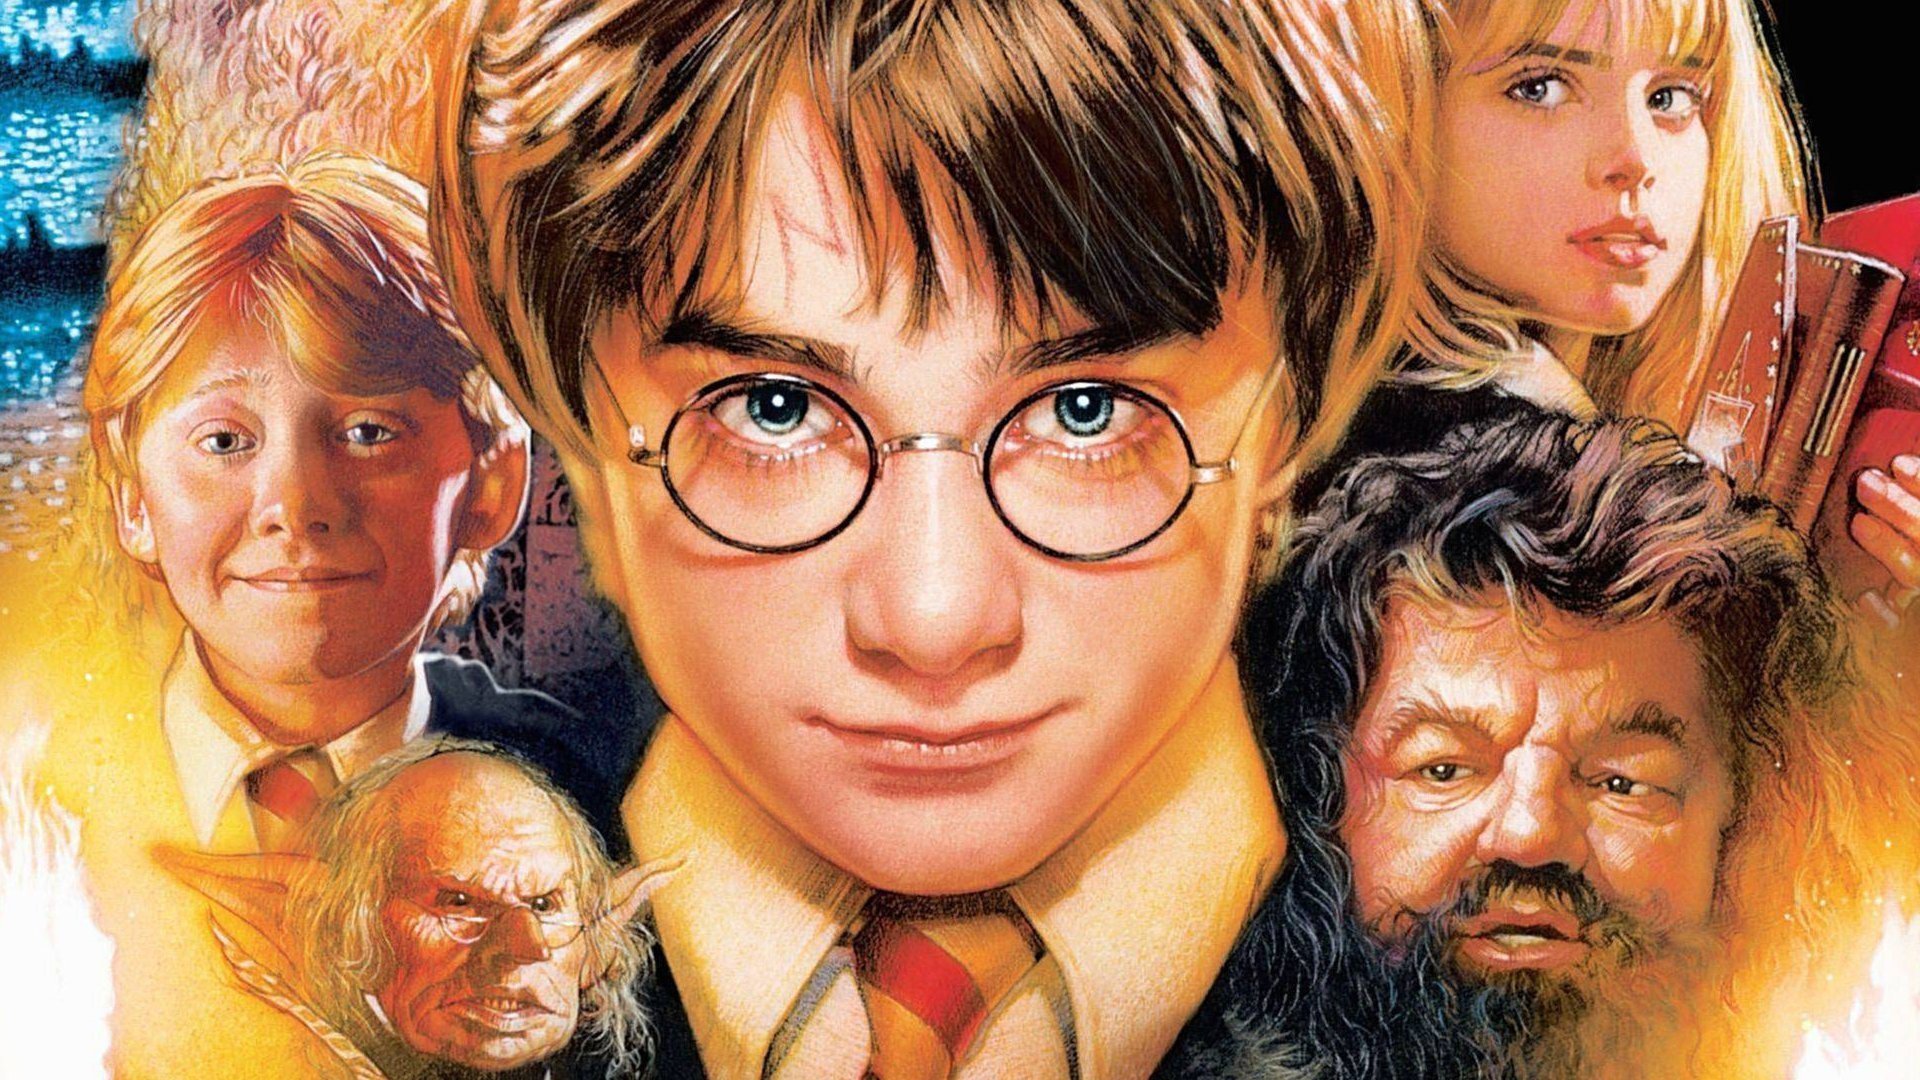 Harry Potter and the Philosopher's Stone is a 2001 fantasy film directed by Chris Columbus and based on J. K. Rowling's 1997 novel of the same name. It is the first film in the Harry Potter series.